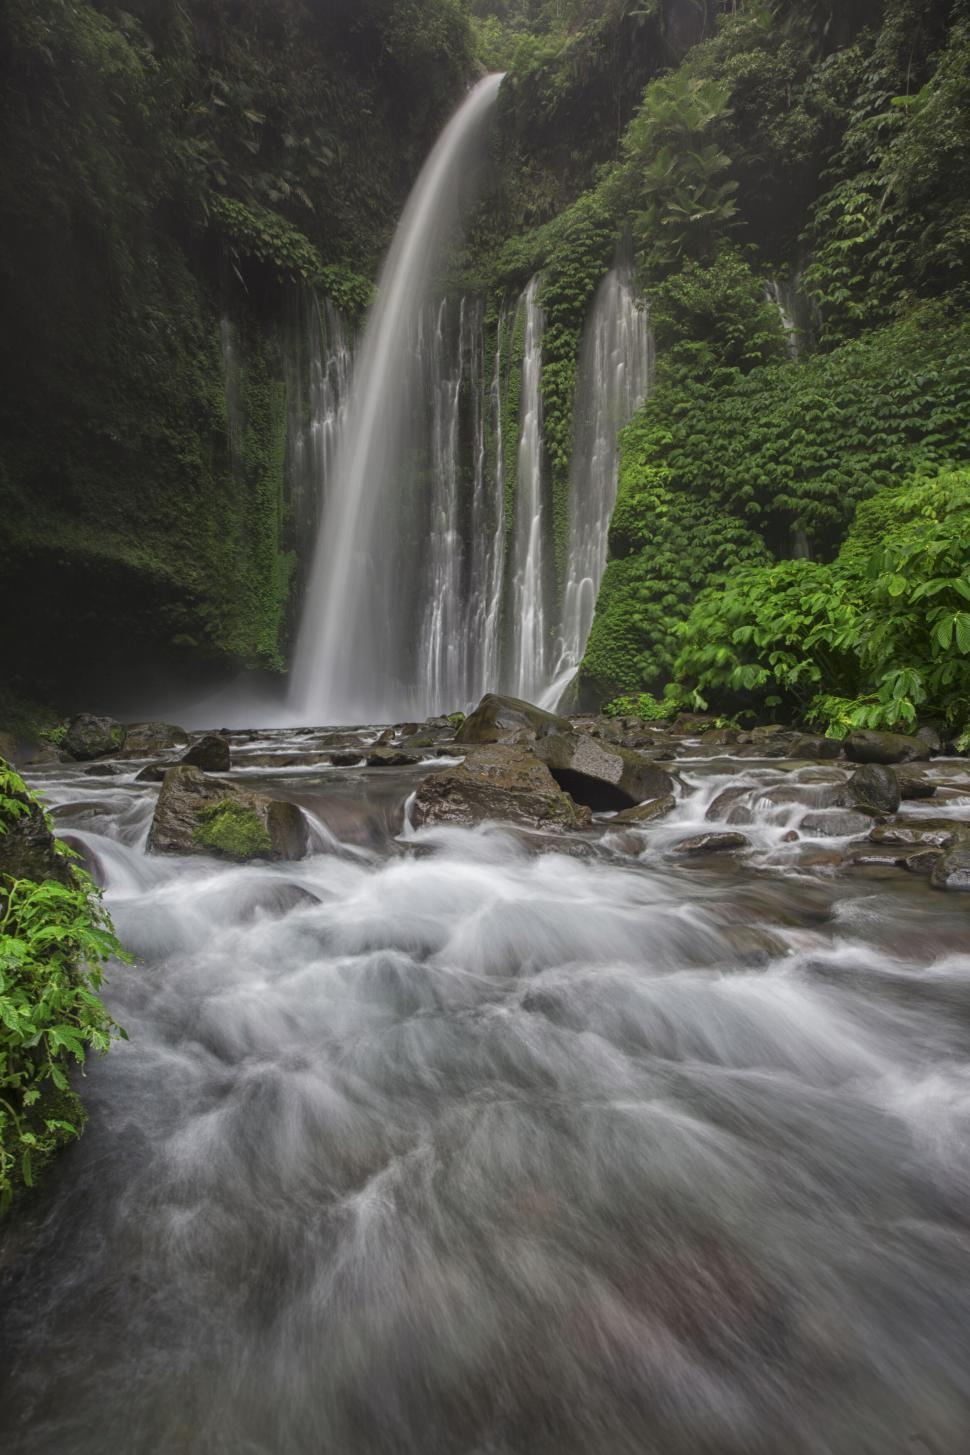 Free Image of Tropical waterfall surrounded by lush greenery 